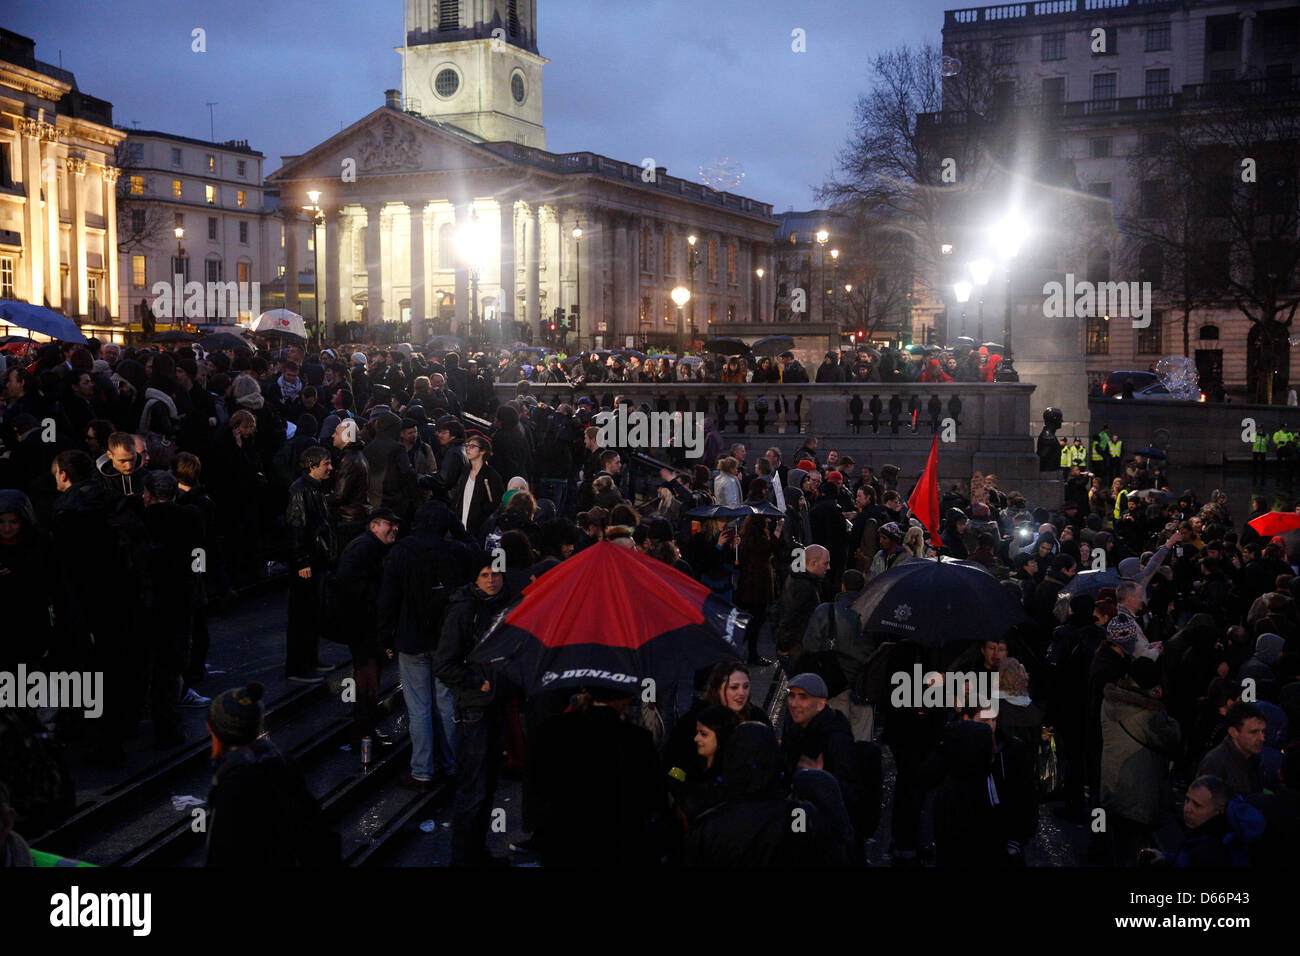 LONDON 13th April, Anti Thatcher party took place at Trafalgar Square in central London with hundreds of protesters celebrating her death. View of Trafalgar square while the protest was still going on. Stock Photo